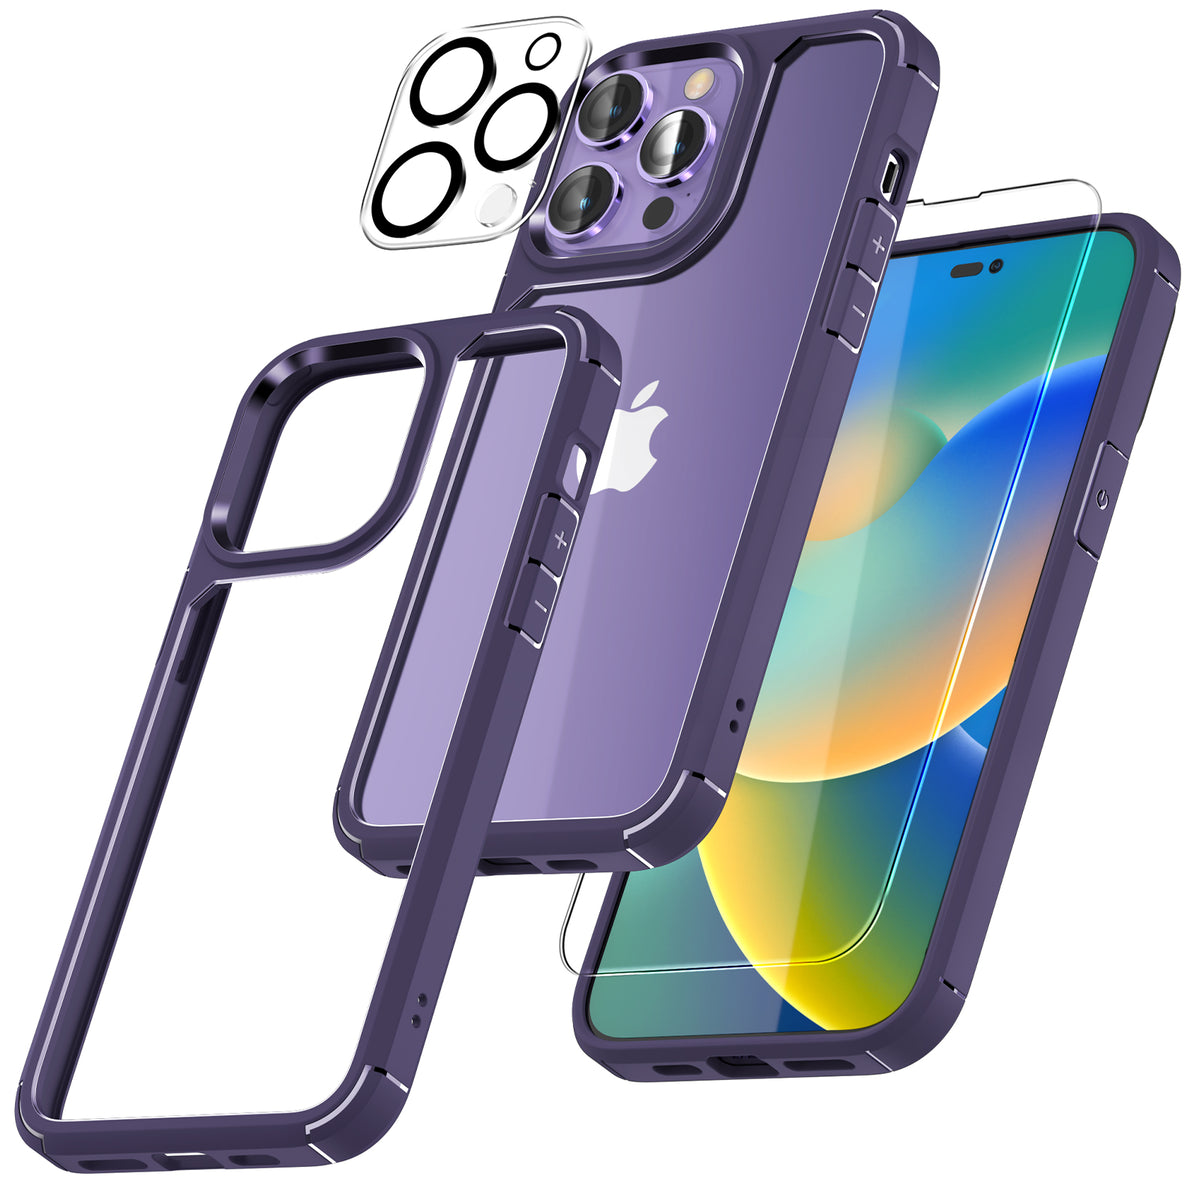 TAURI [5 in 1] for iPhone 14 Pro Max Case [Not Yellowing], with 2 Tempered Glass Screen Protectors + 2 Camera Lens Protectors [Military Grade Protection] Shockproof Slim 14 Pro Max 6.7 Inch, Purple